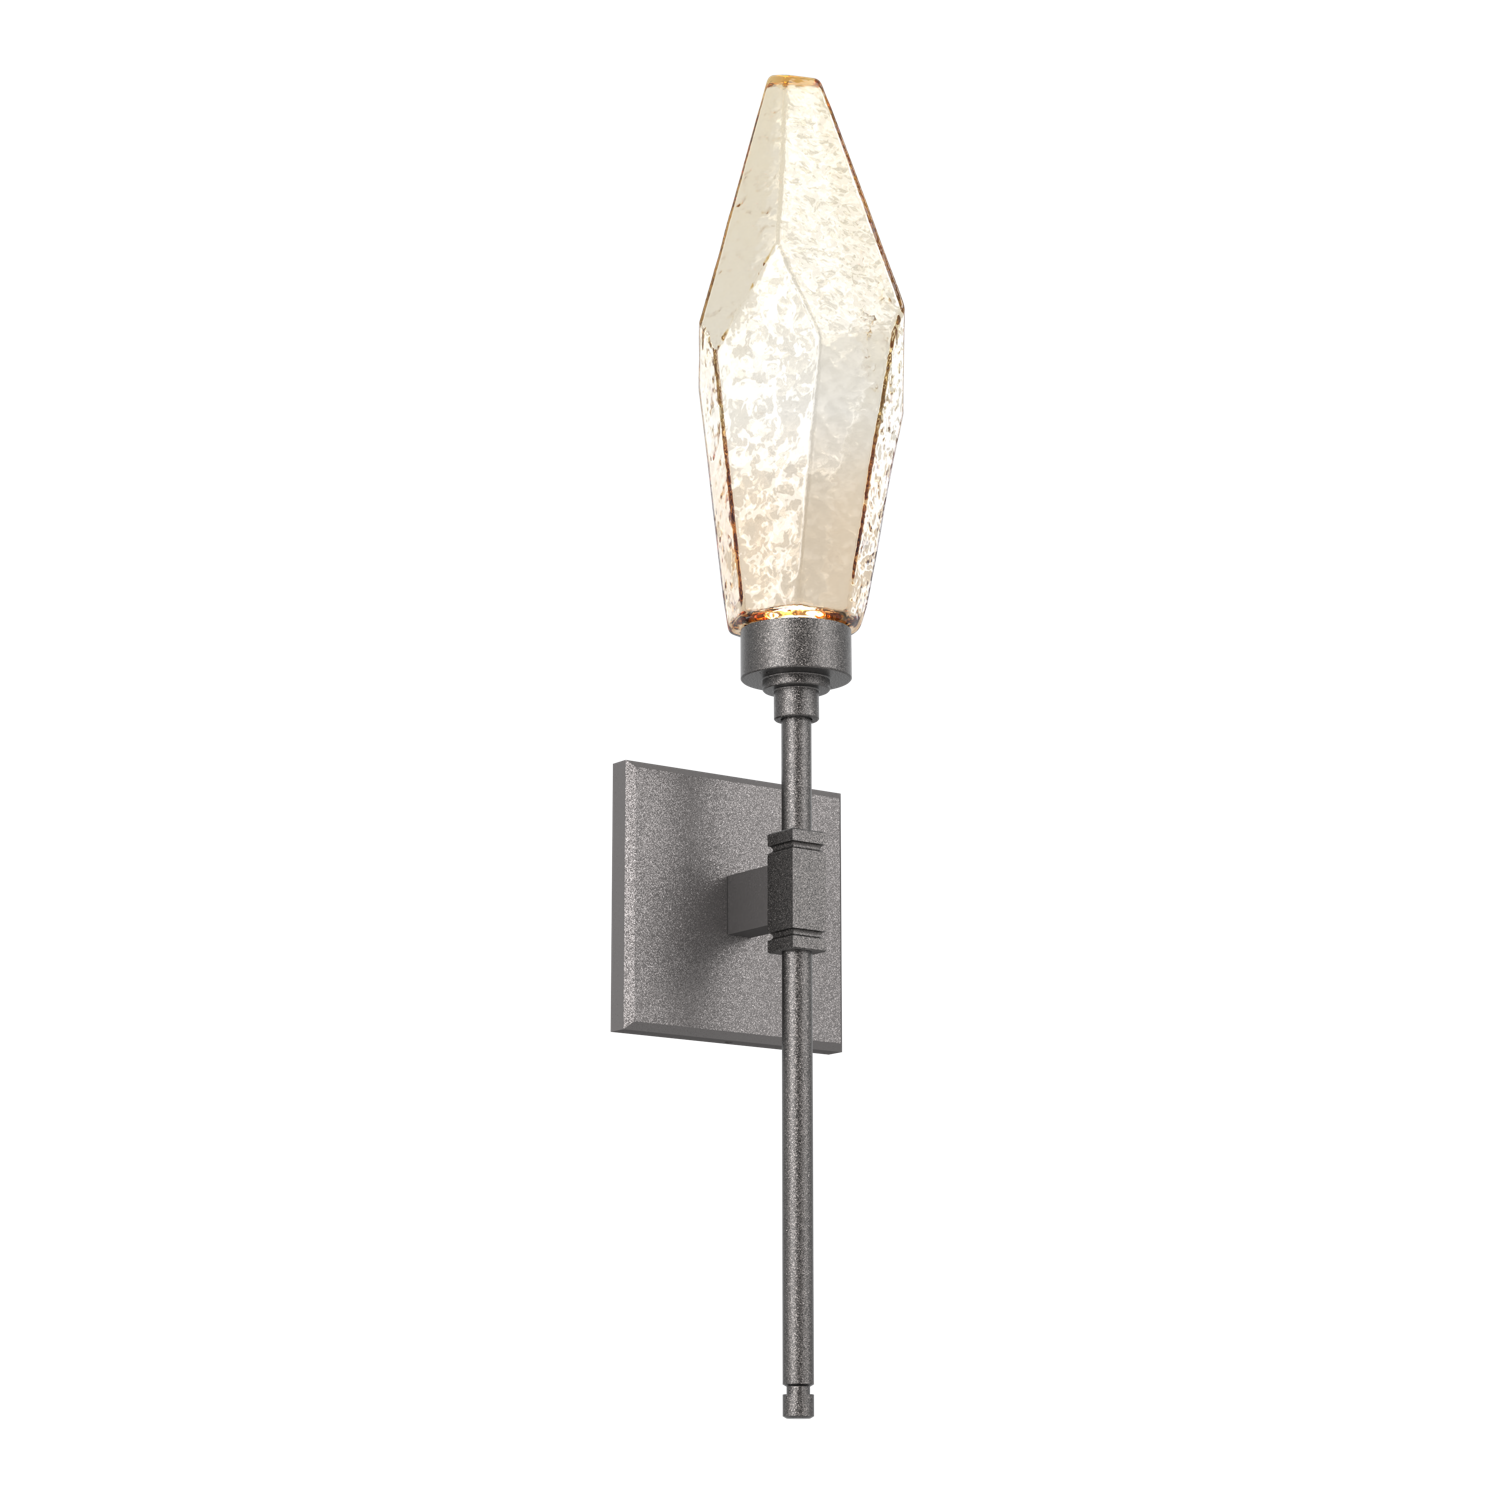 IDB0050-04-GP-CA-Hammerton-Studio-Rock-Crystal-ada-certified-belvedere-wall-sconce-with-graphite-finish-and-chilled-amber-blown-glass-shades-and-LED-lamping